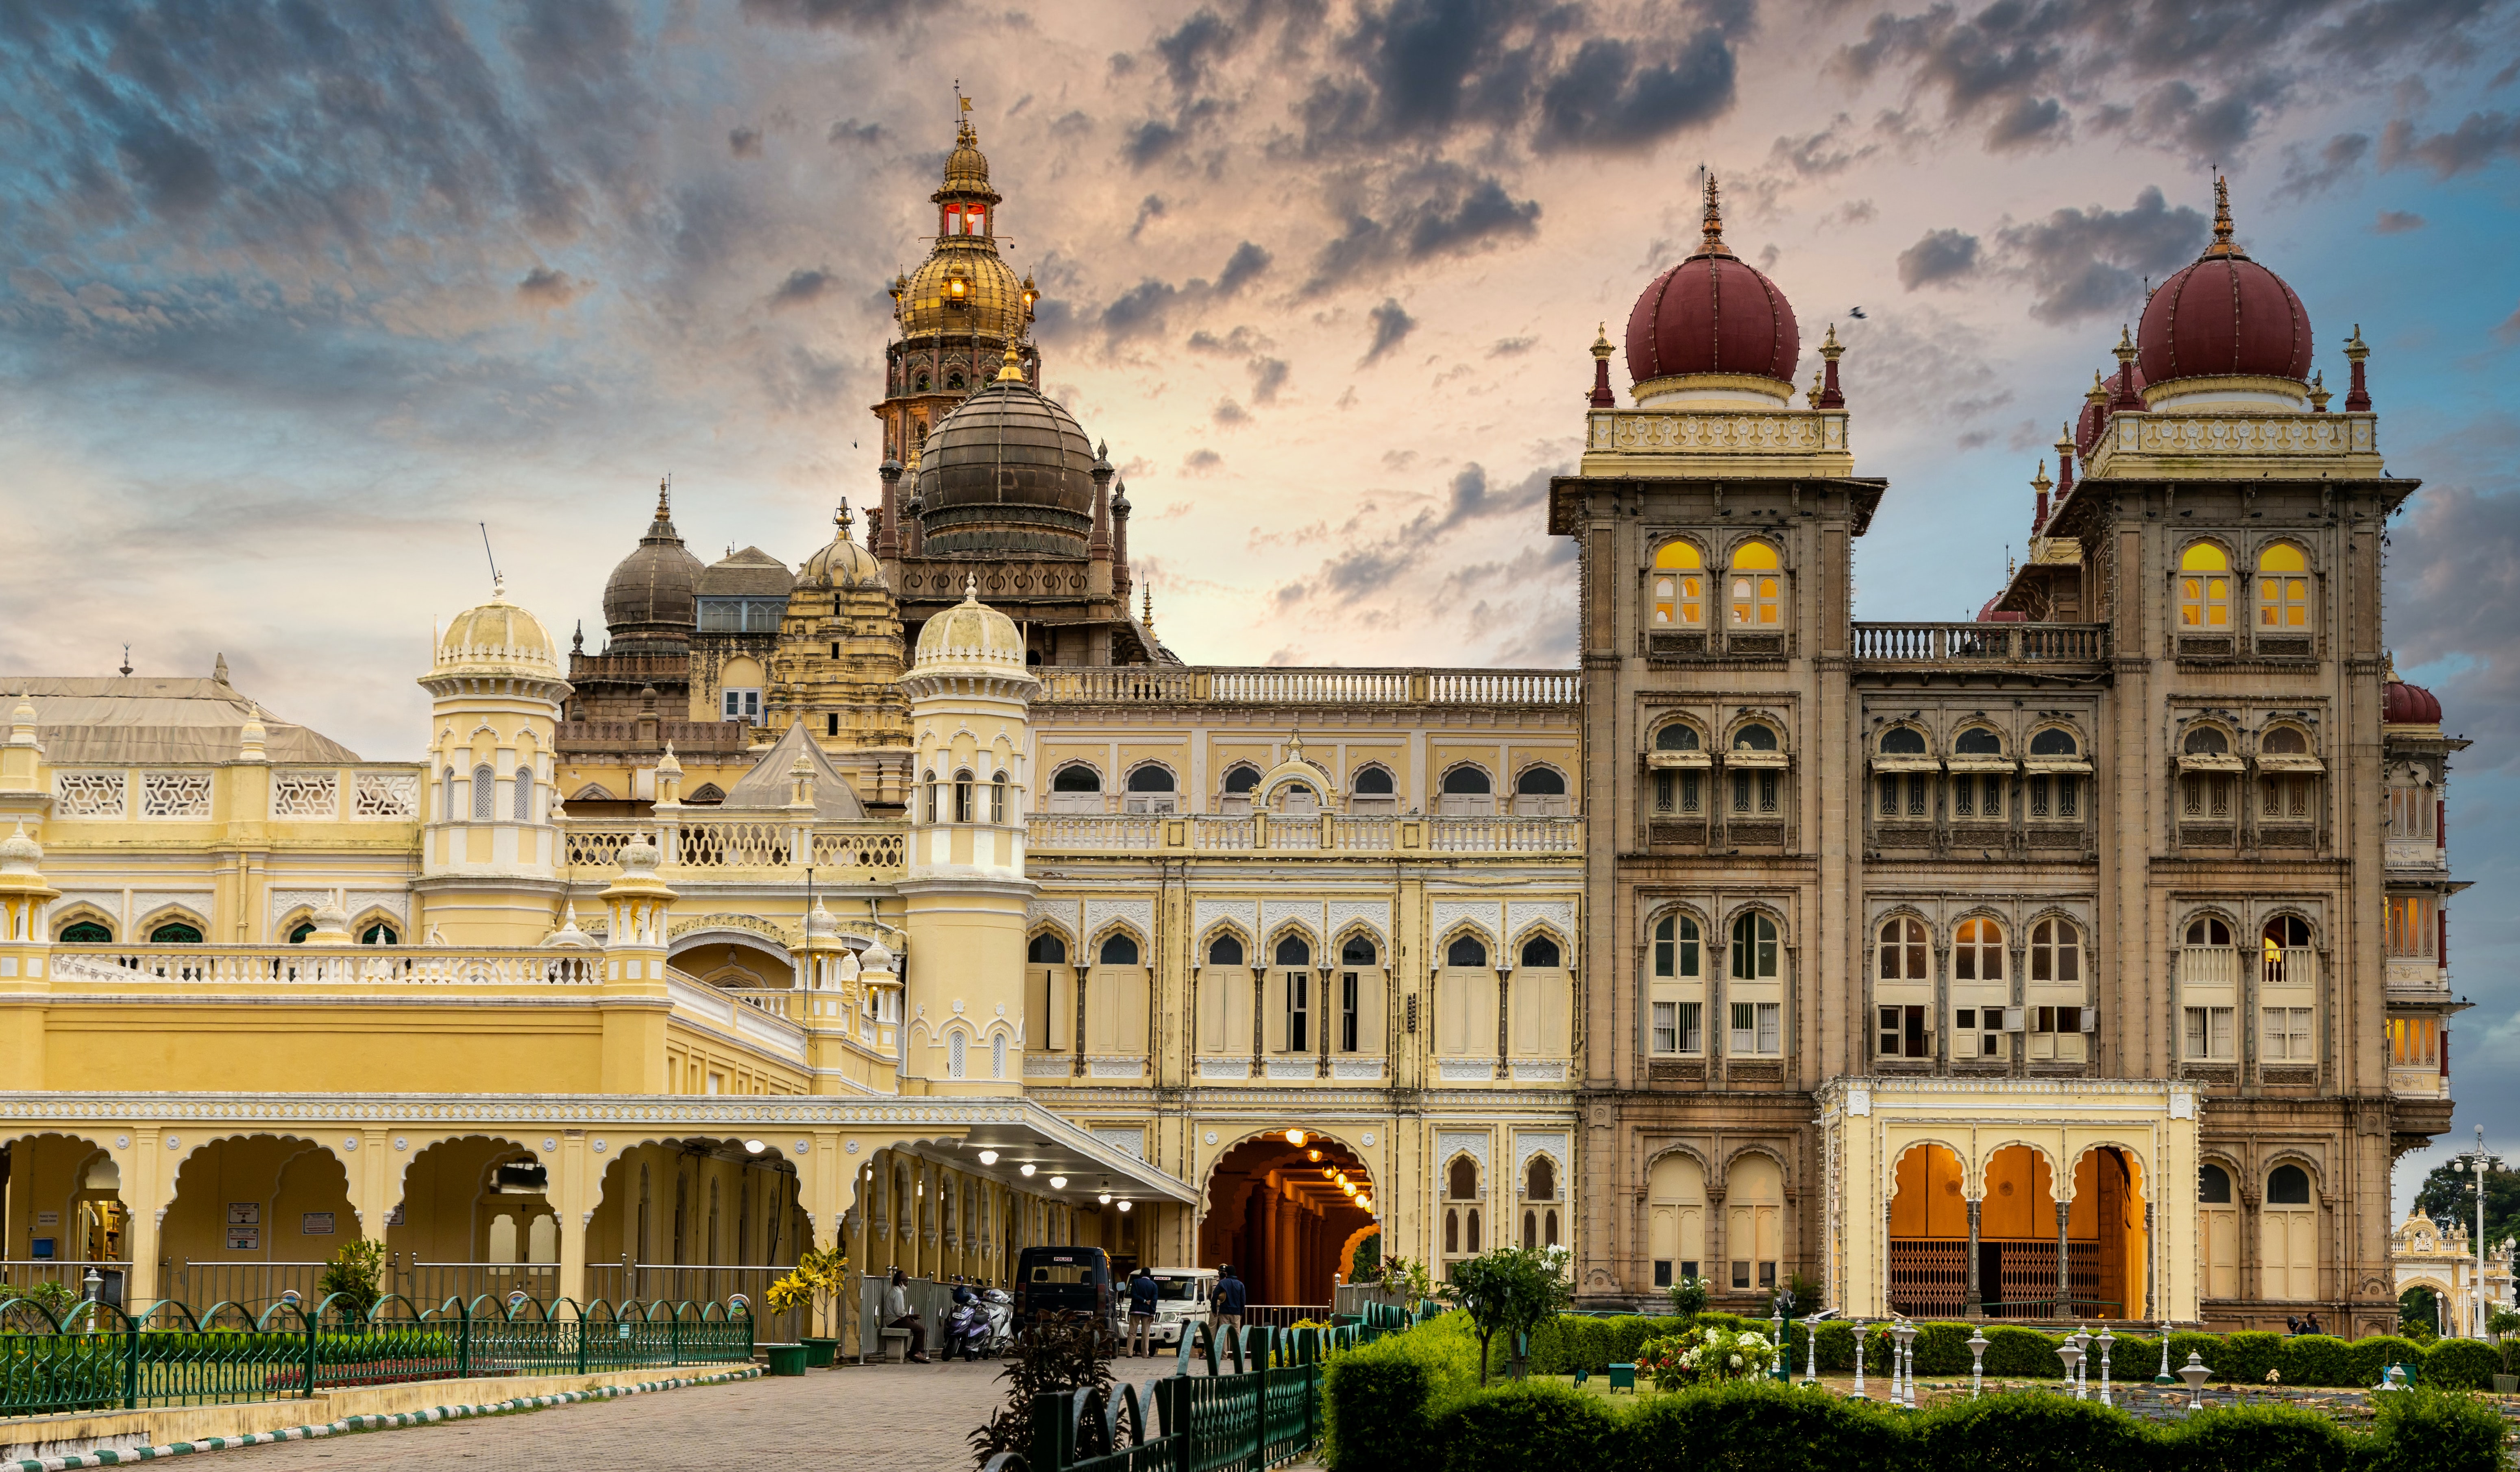 Stay in an Indian Palace